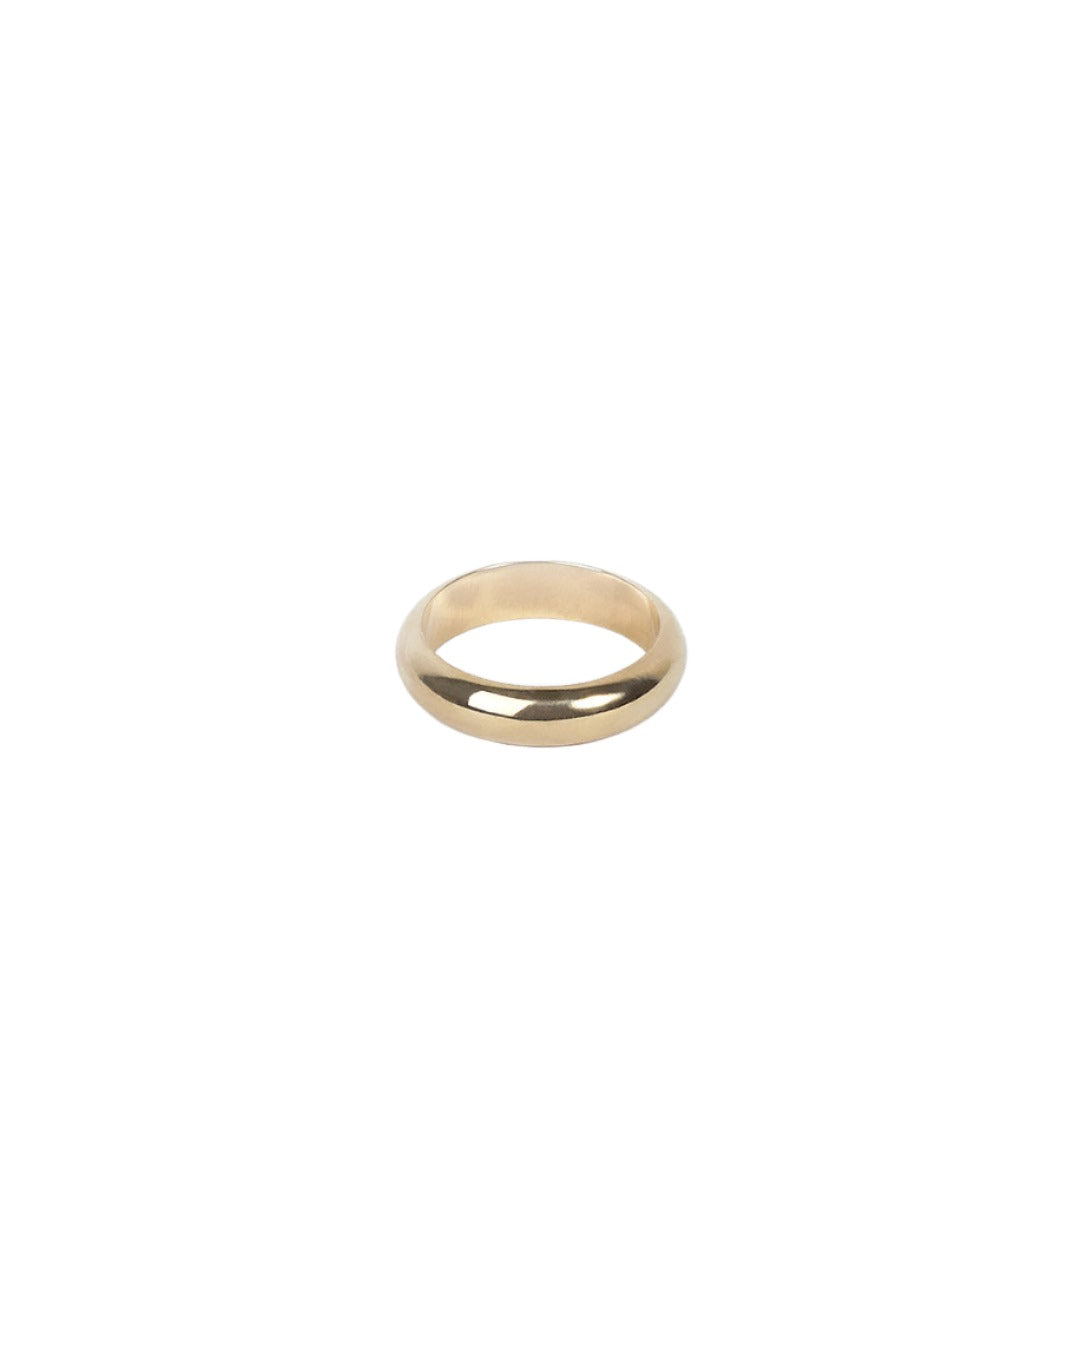 Handmade Simple Band Ring - Bold Form Ring - NEEO